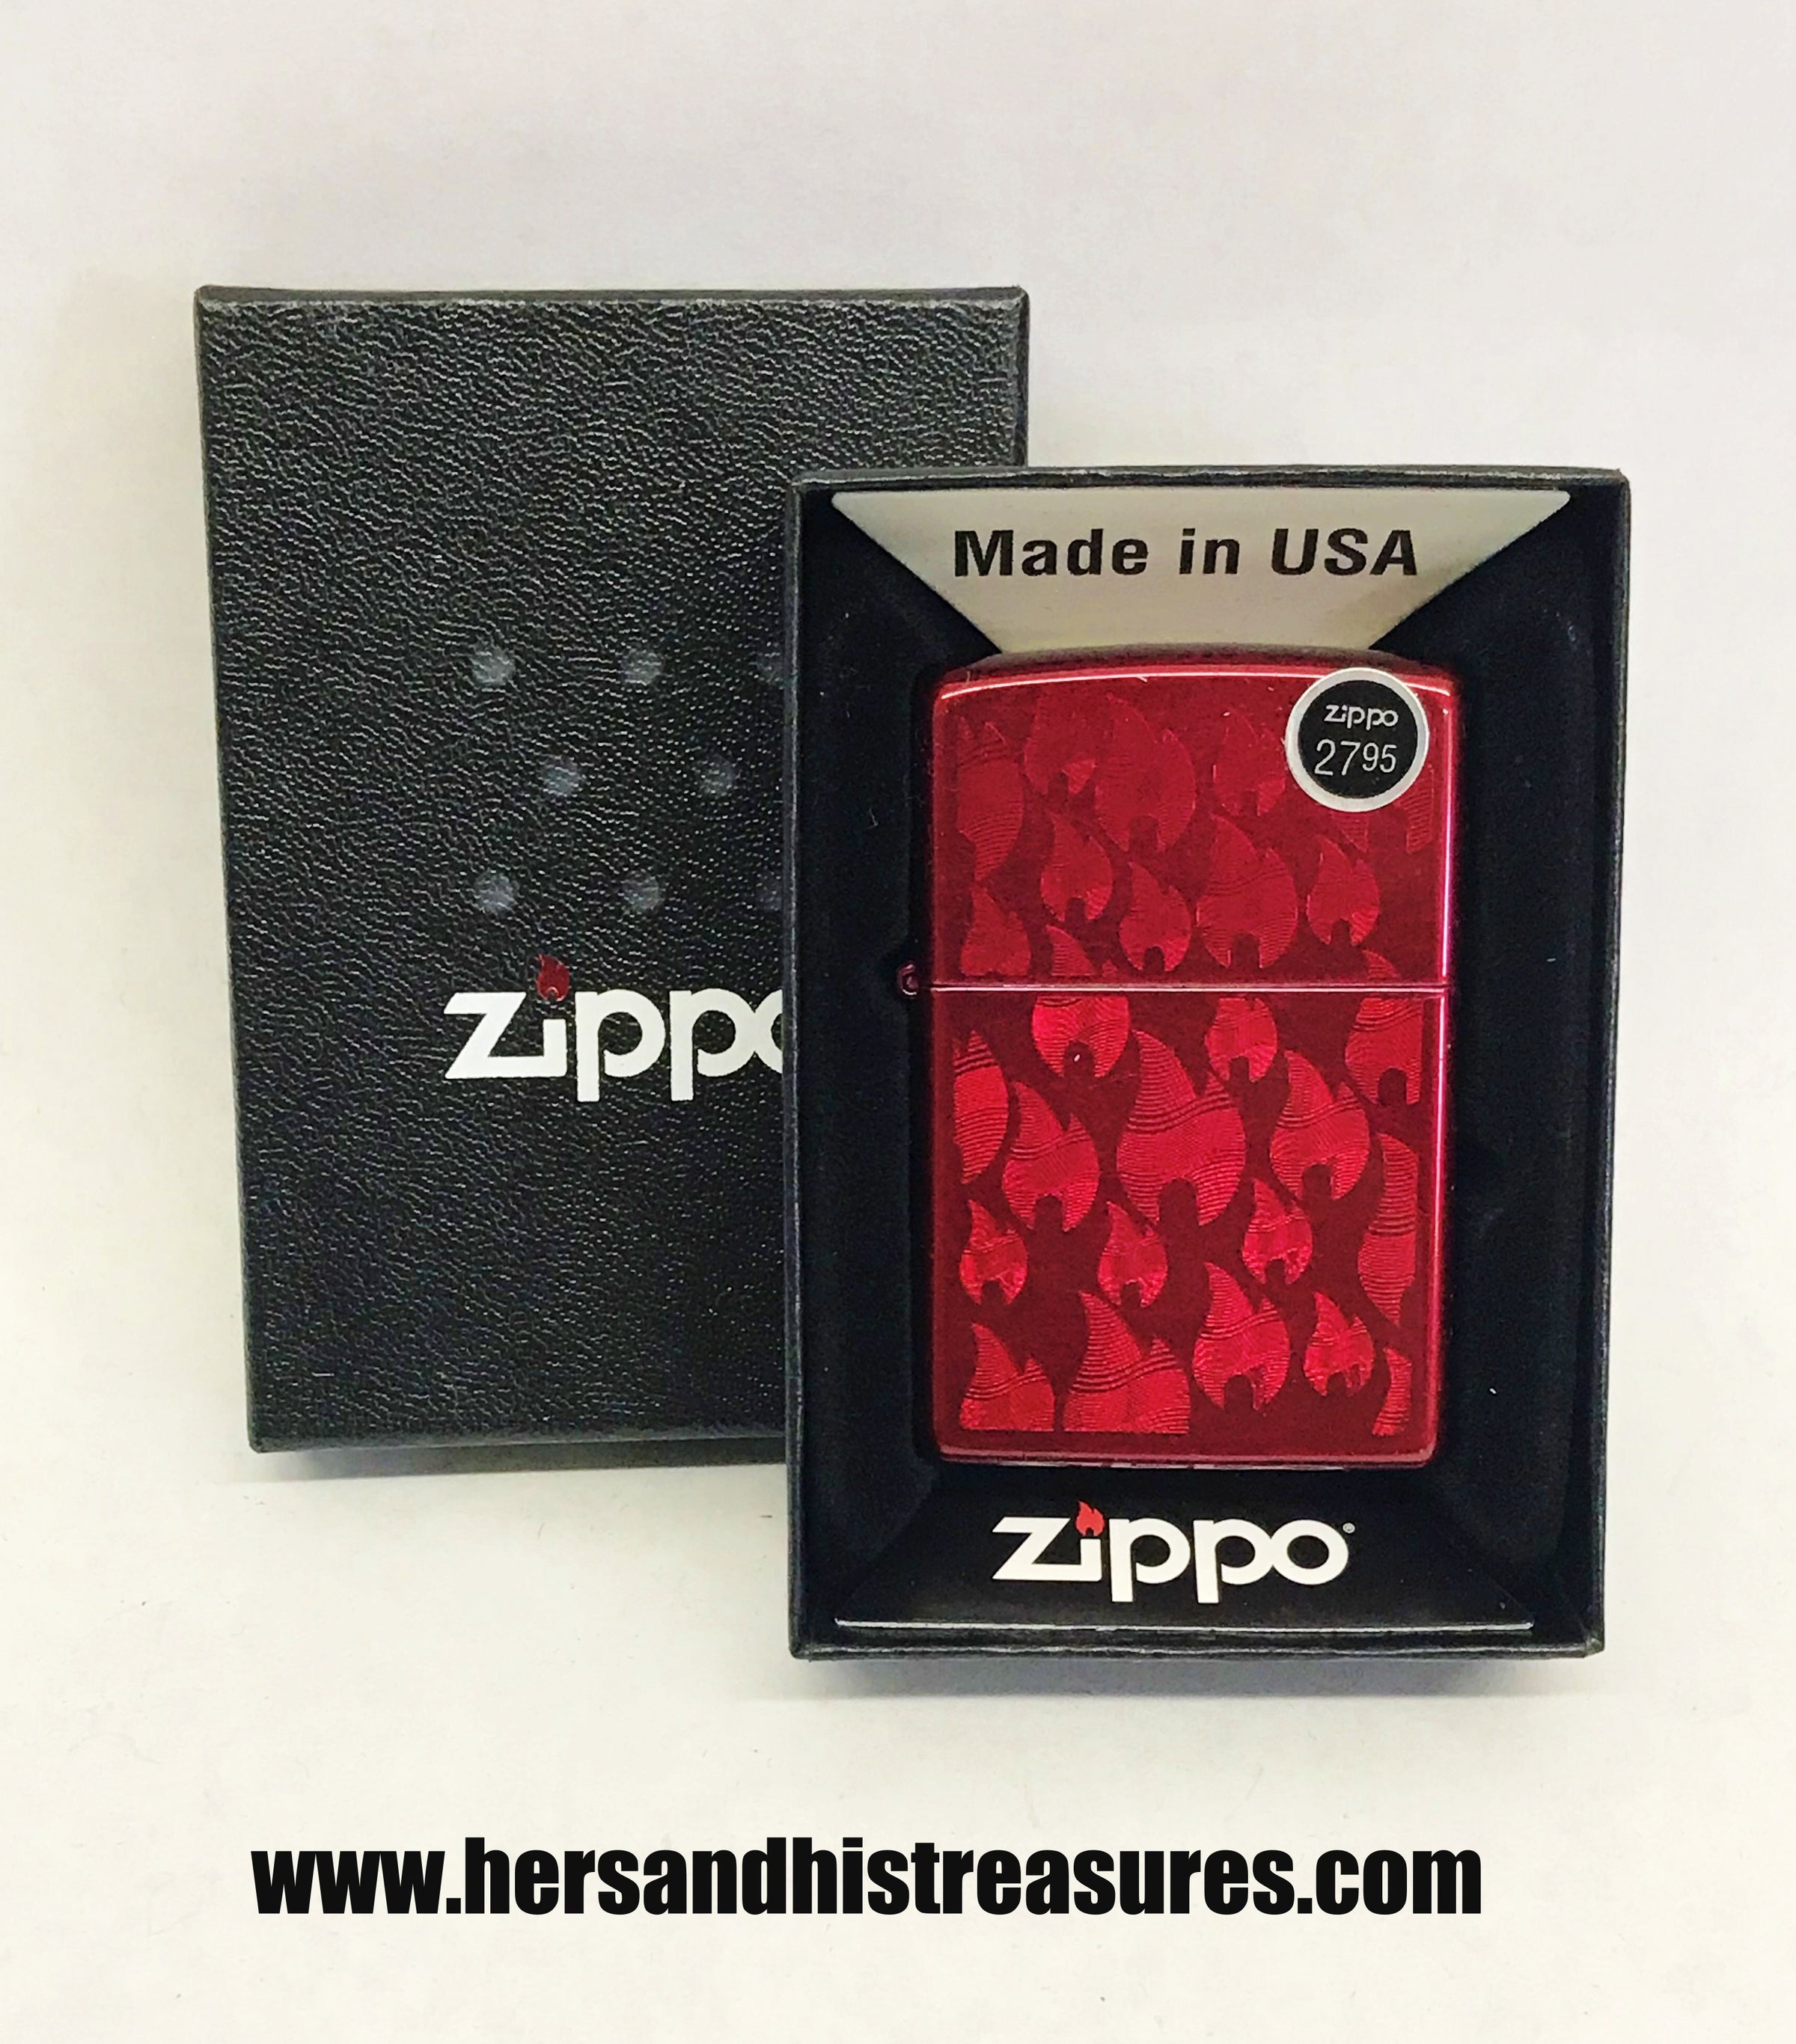 www.hersandhistreasures.com/products/29824-iced-zippo-flame-design-lighter